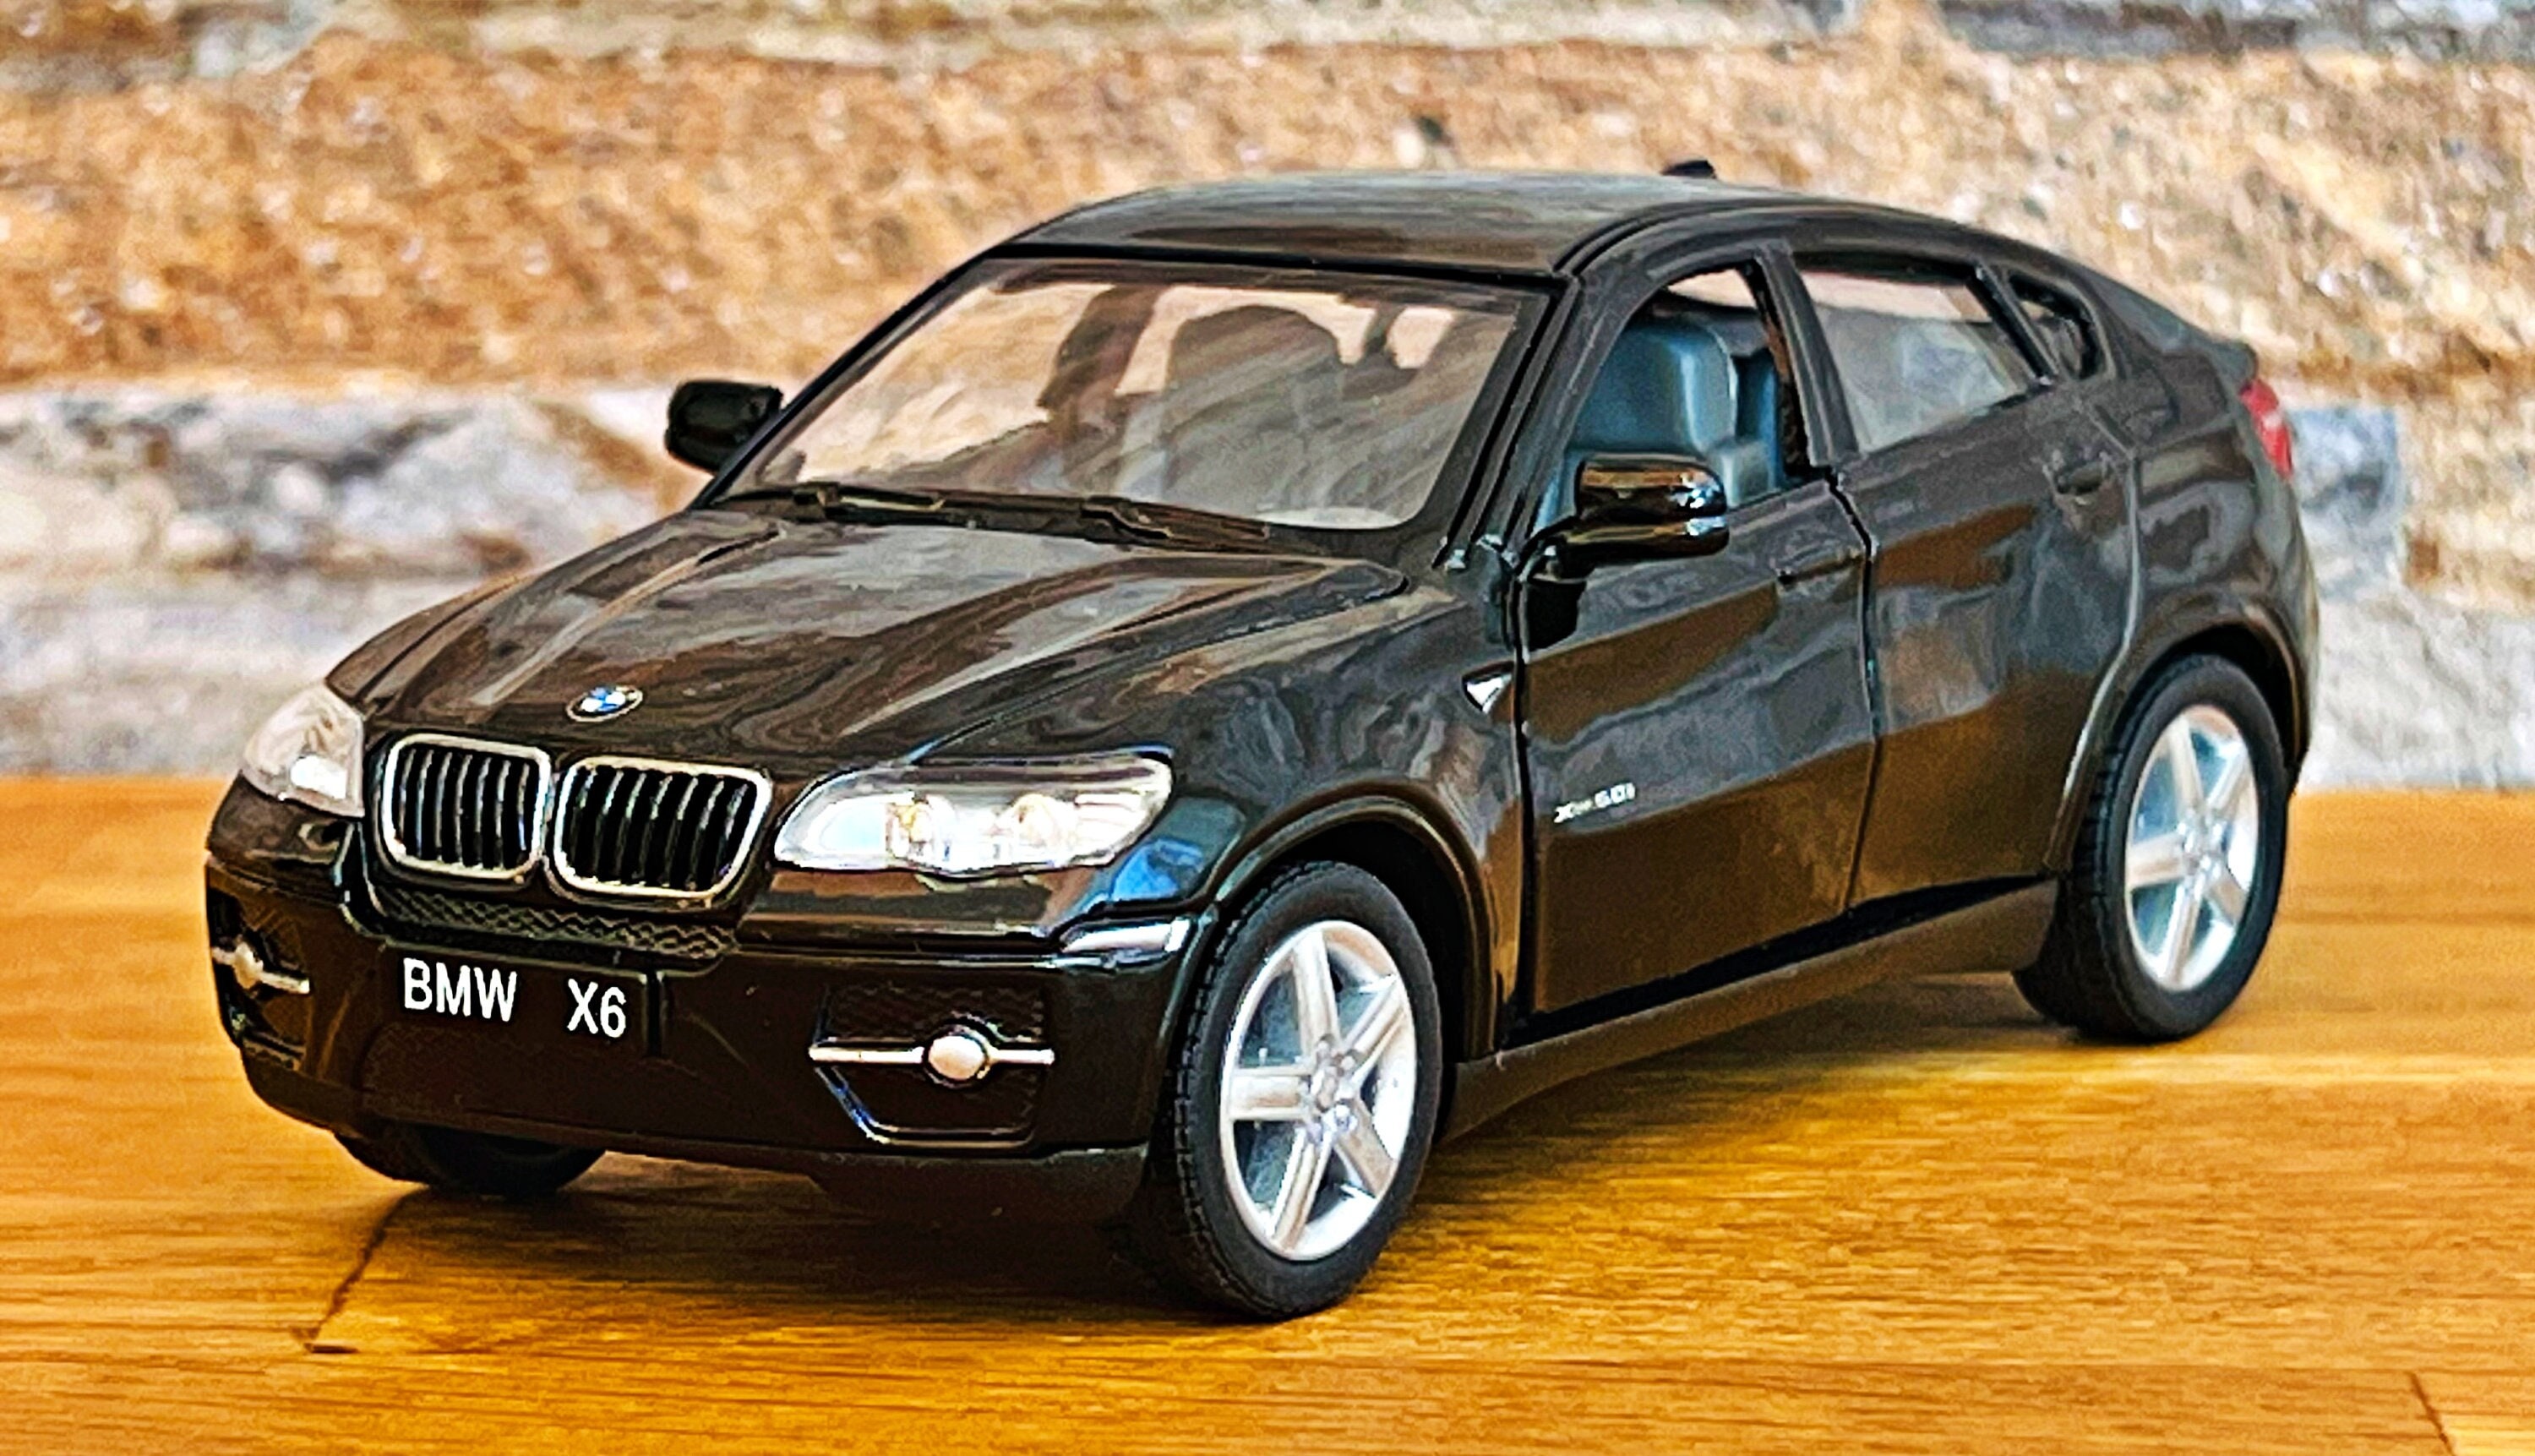 Voiture miniature BMW X6 sous licence from China Manufacturer - Shenzhen  BBJ Toys Co., Ltd